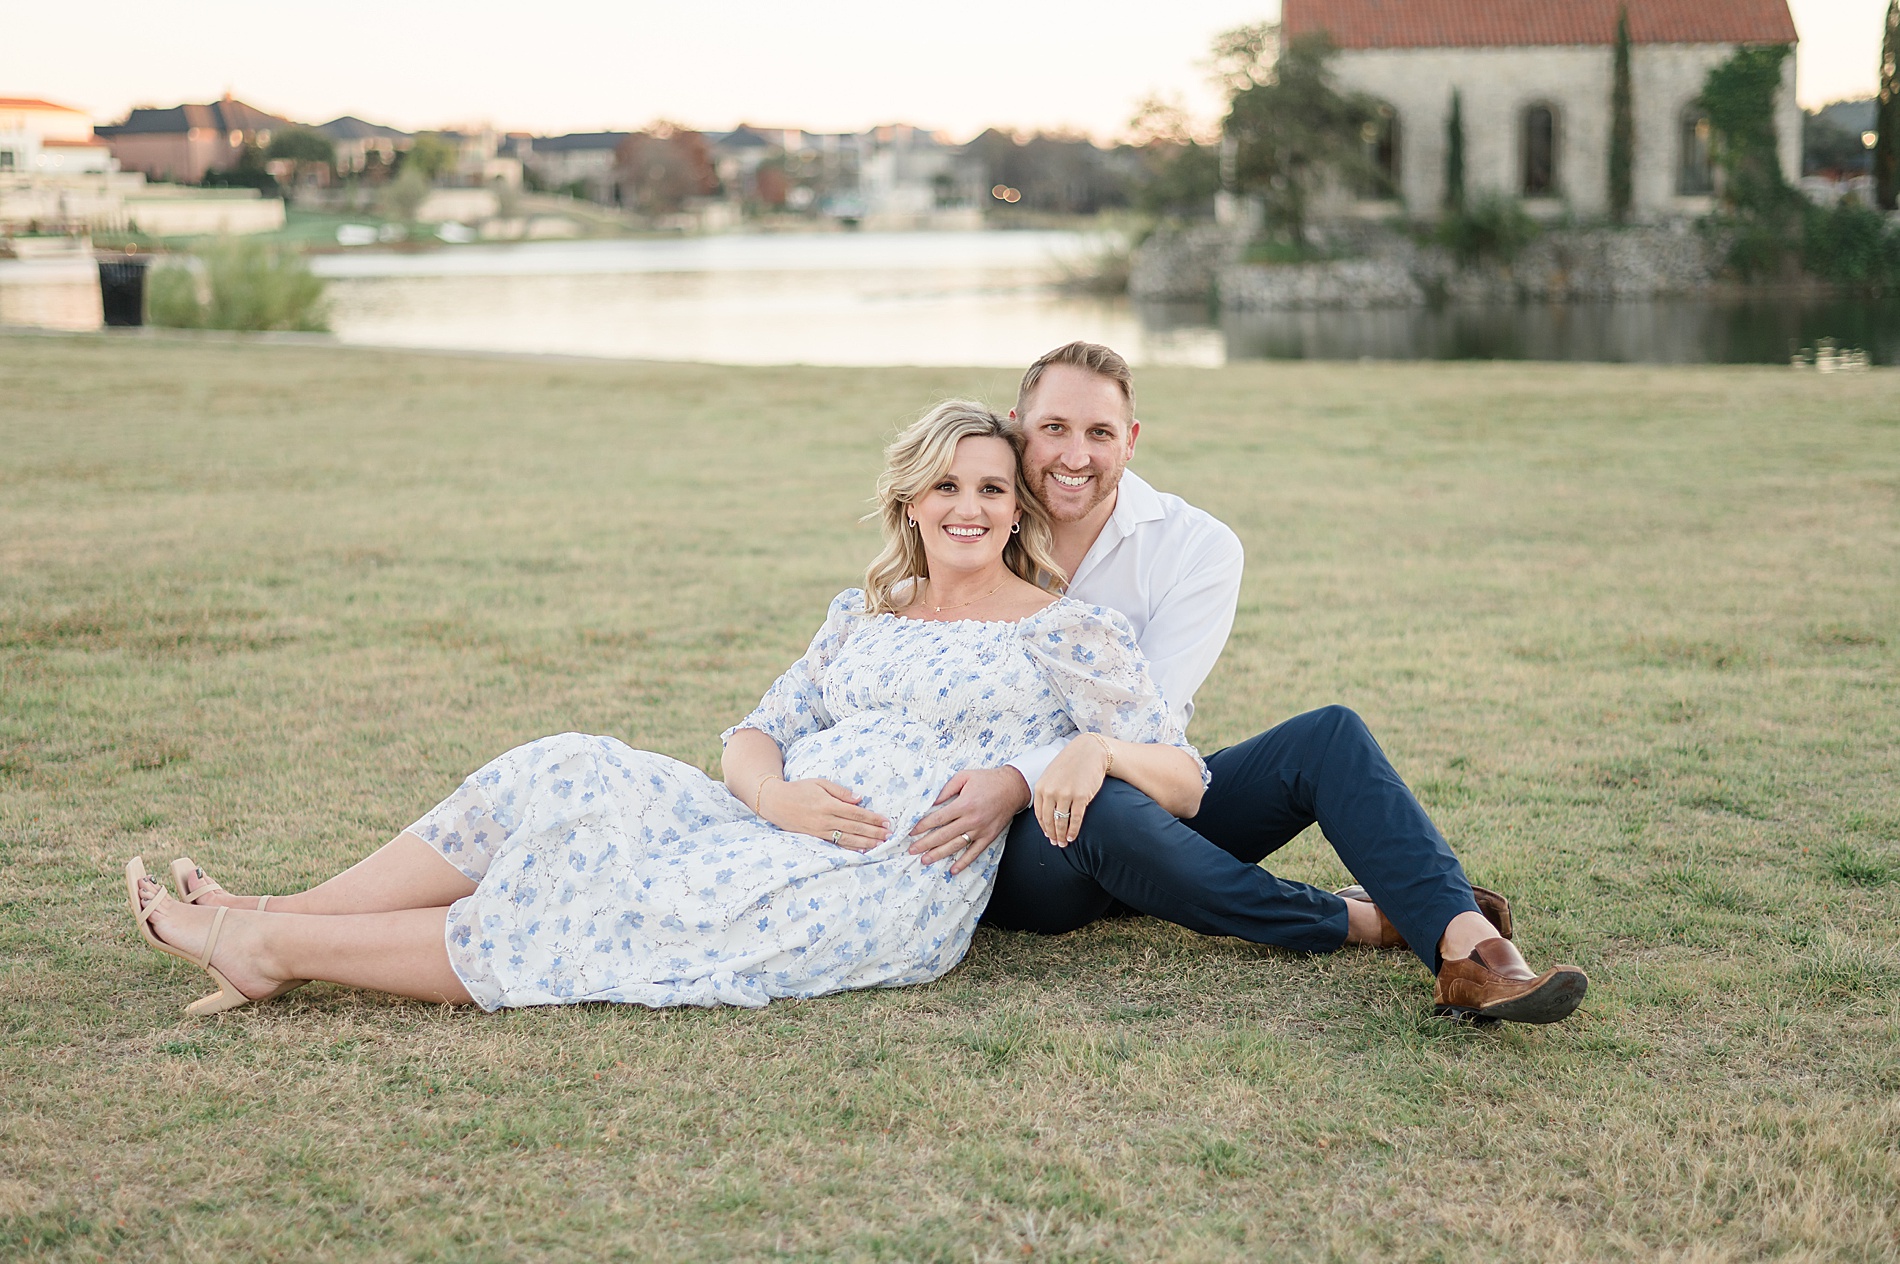 5 Reasons to Book Maternity Photos photographed by Lindsey Dutton Photography, a Dallas Family photographer
